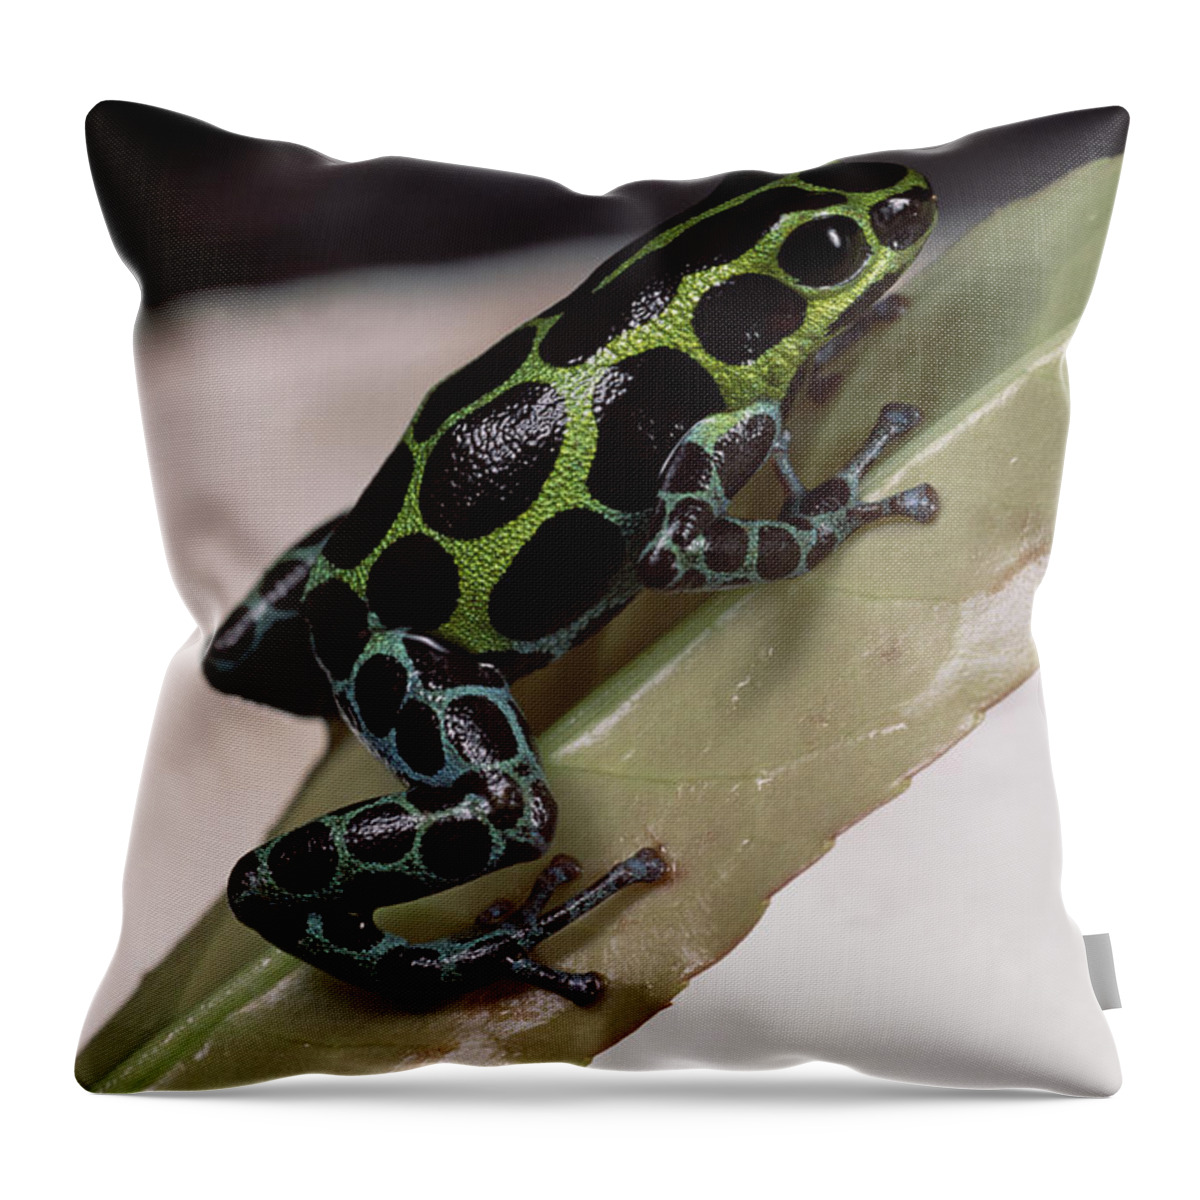 Feb0514 Throw Pillow featuring the photograph Red-headed Poison Frog Amazonia Ecuador by Mark Moffett